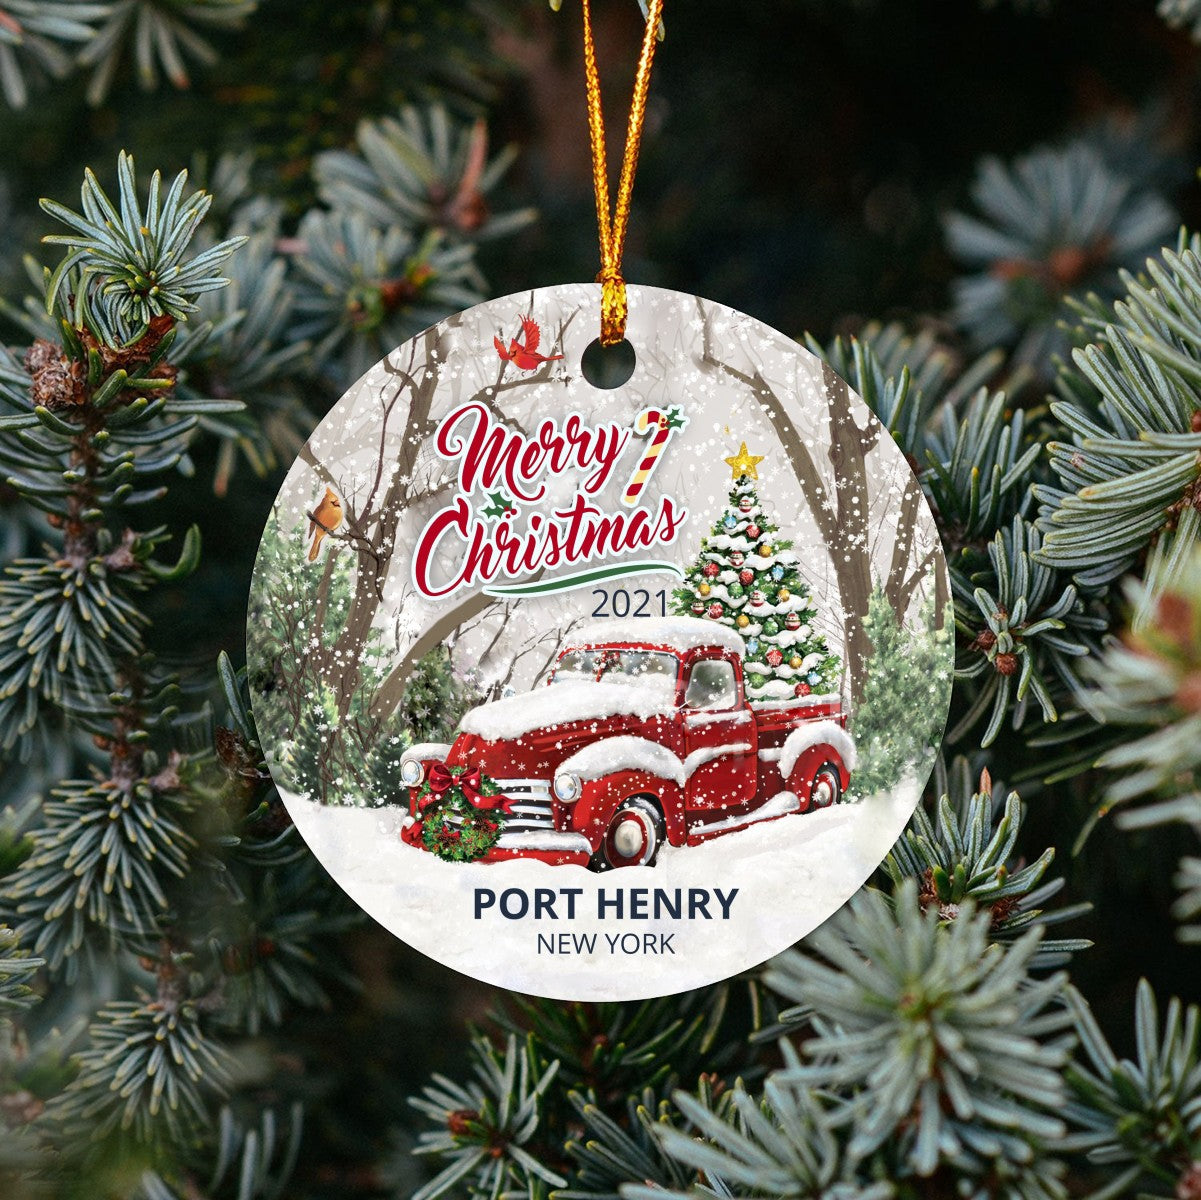 Christmas Tree Ornaments Port Henry - Ornament With Name City, State Port Henry New York NY Ornament - Red Truck Xmas Ornaments 3'' Plastic Gift For Family, Friend And Housewarming